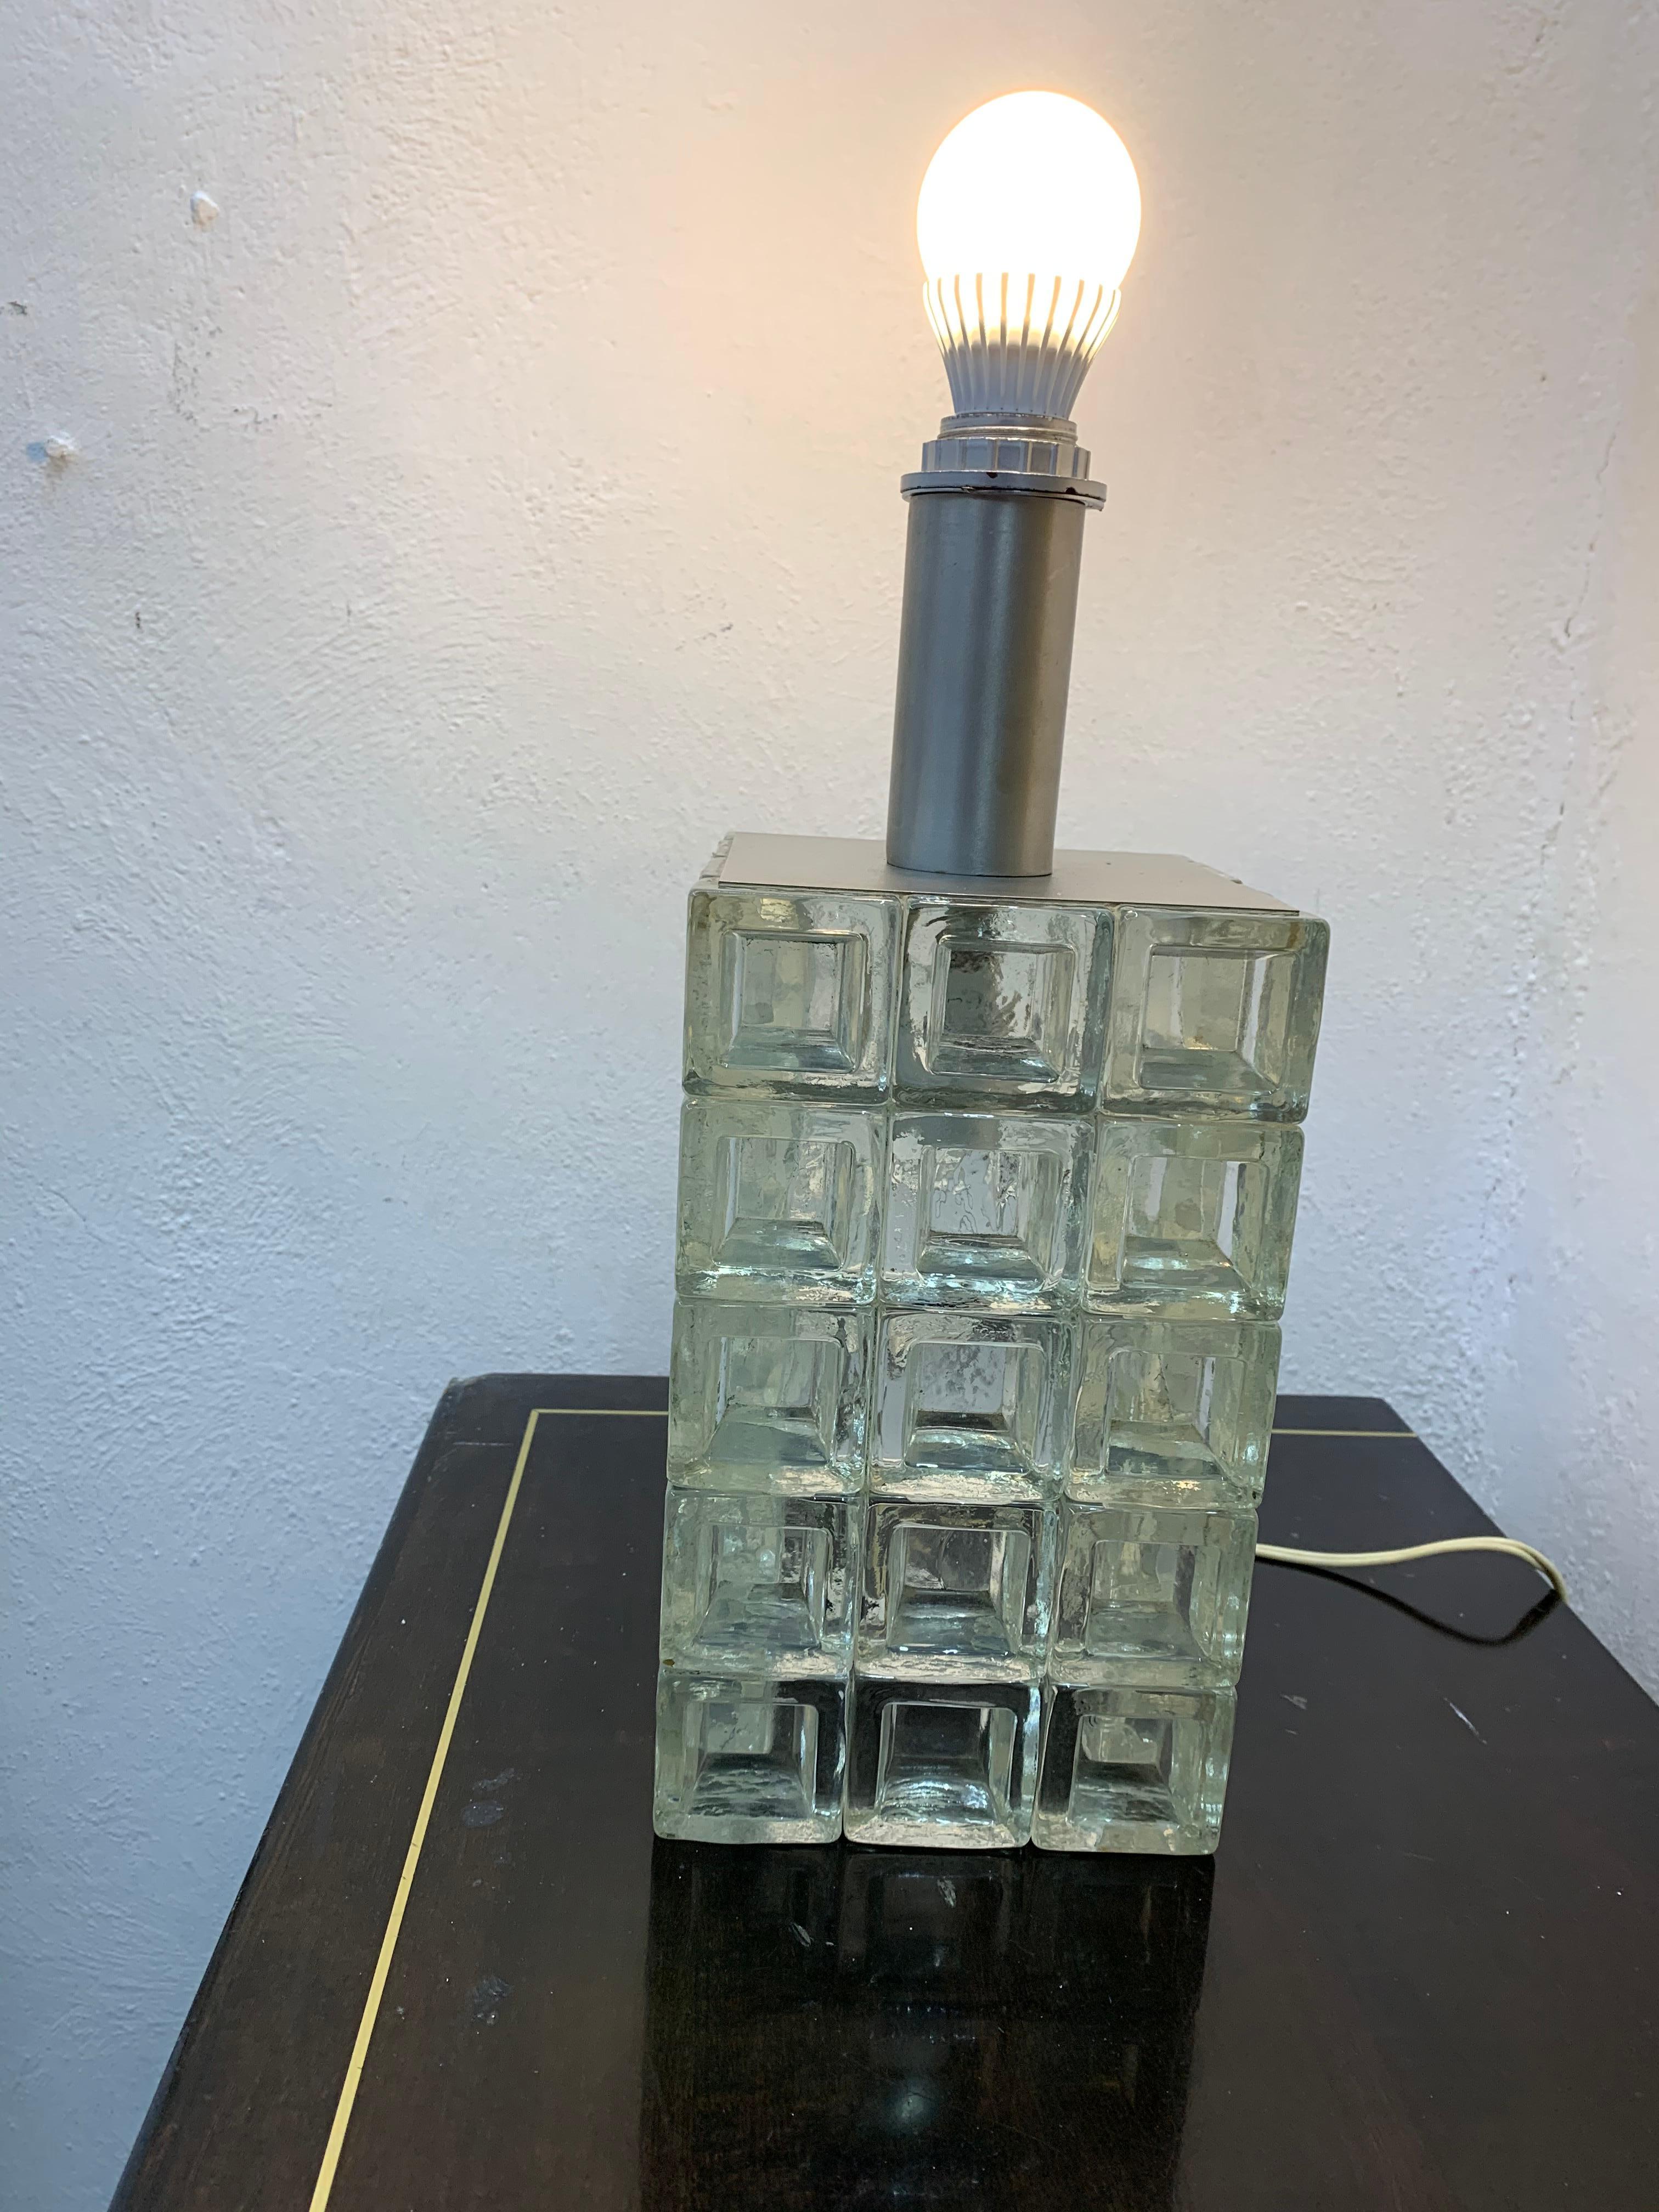 Mid-20th Century Mid-Century Modern Table Lamp by Albano Poli, Poliarte, Murano, Italy circa 1960 For Sale